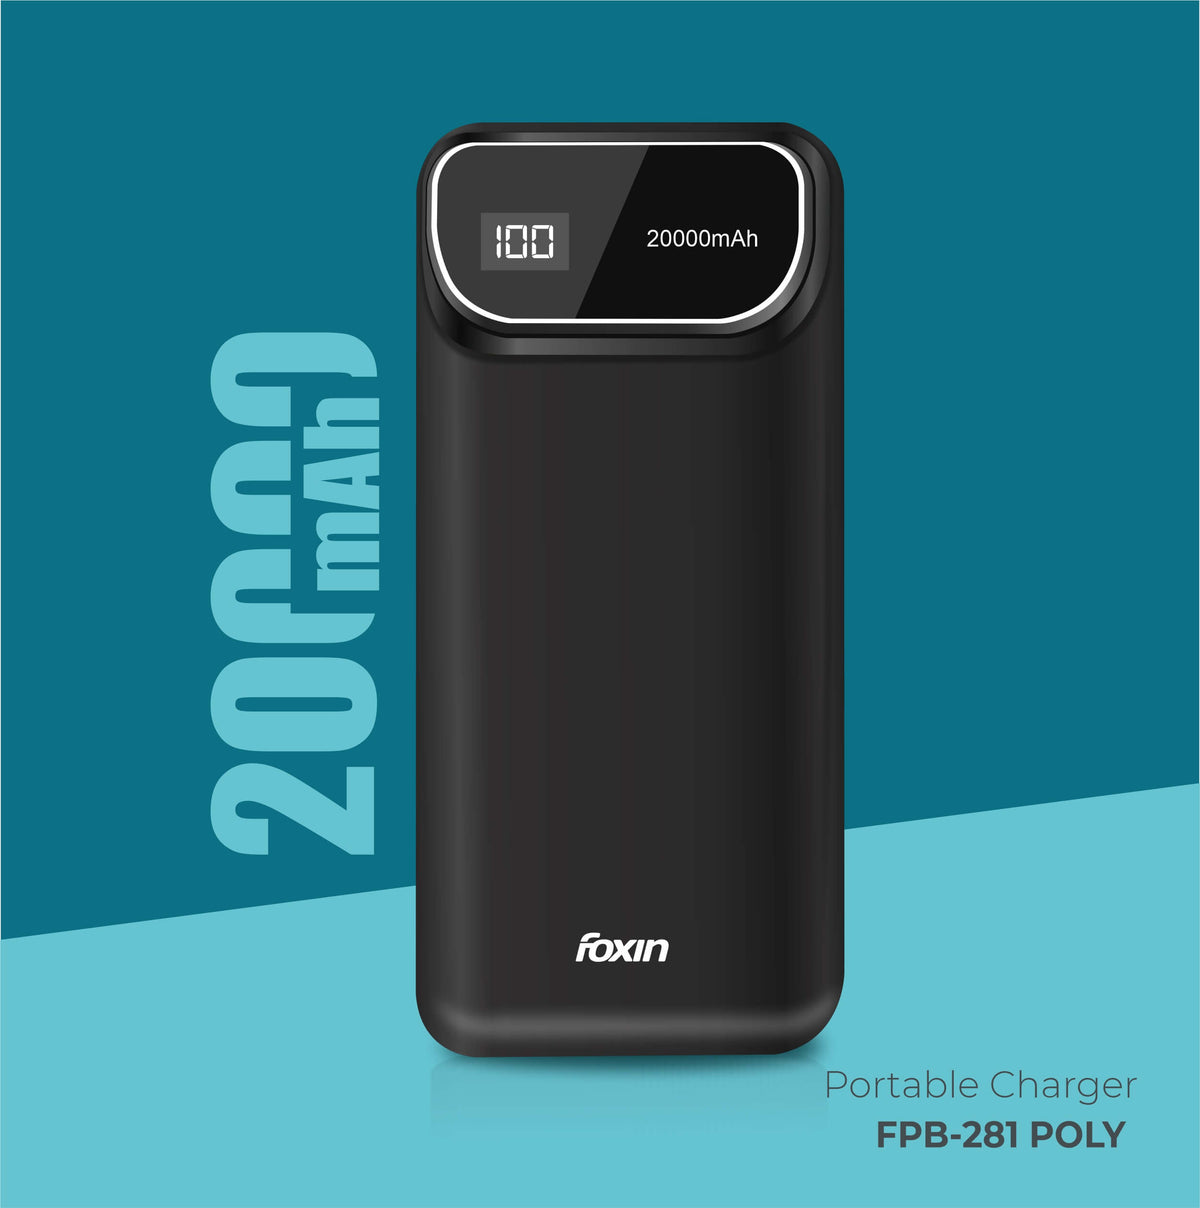 Foxin FPB-281 Poly Power Bank with 20000mAh Battery,12W Fast Charging, Type C &amp; Micro USB Input, 2 USB outputs, BIS Certified, Made in India